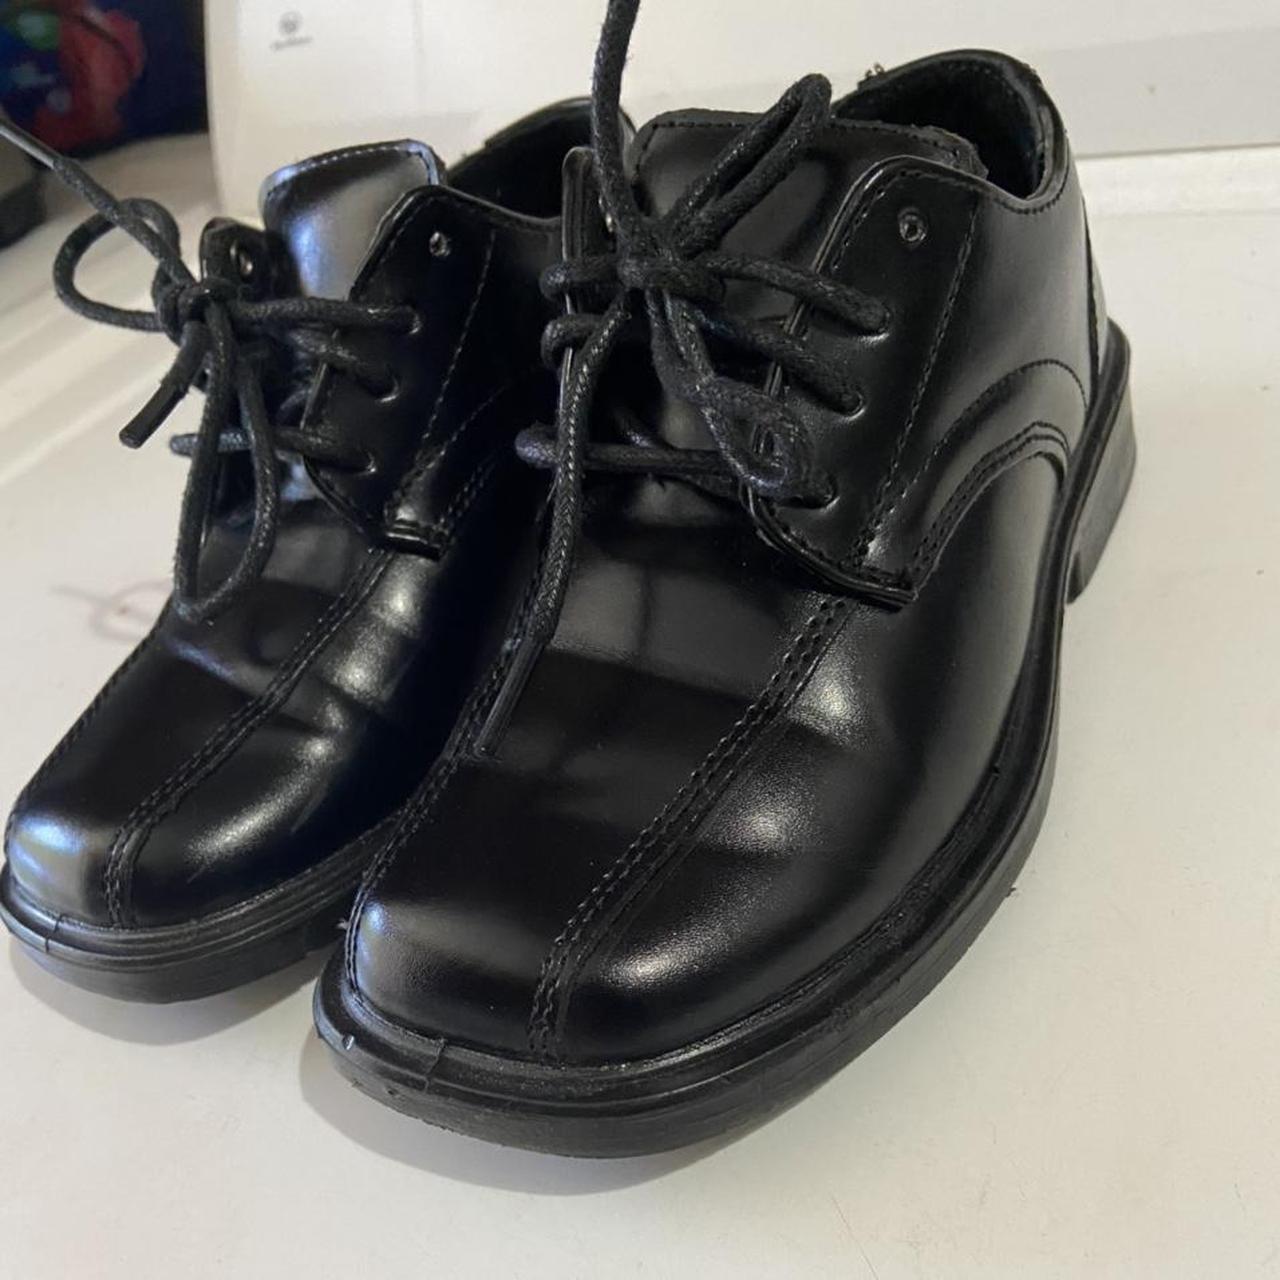 Boys dress shoes size 10.5 🙏🏼 Hey guys welcome to my... - Depop